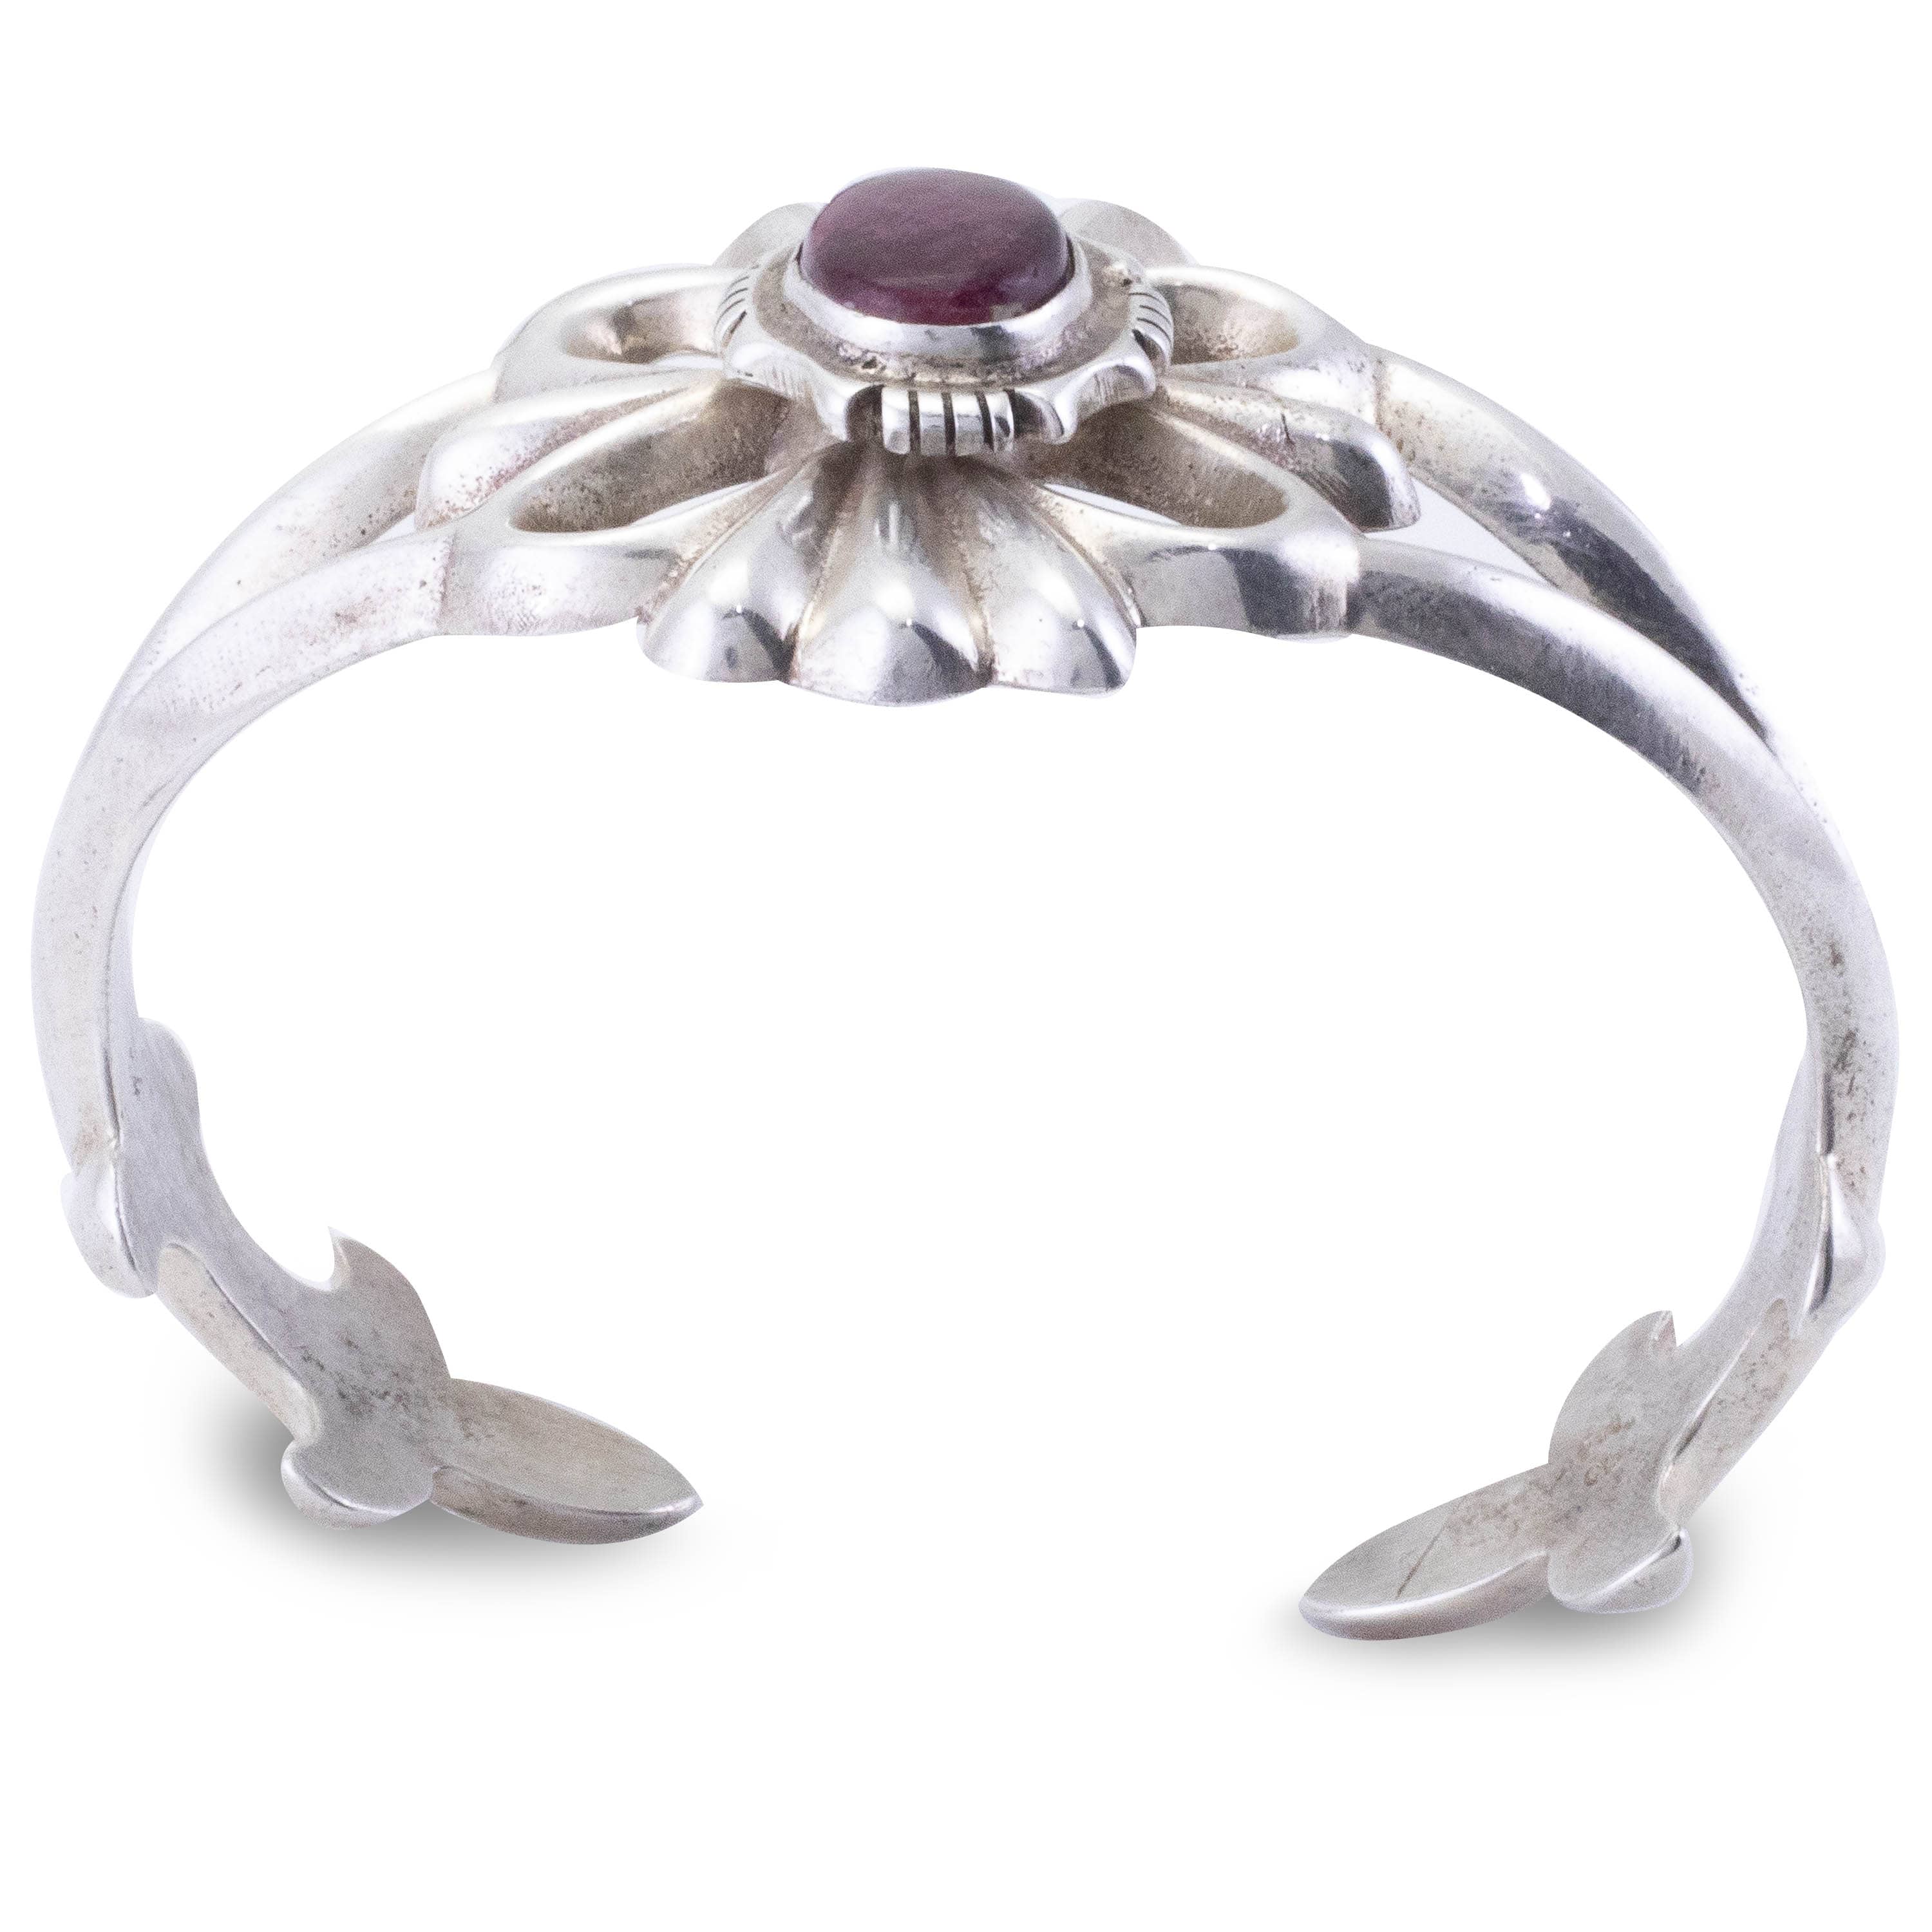 Kalifano Native American Jewelry Robert Chee Navajo Purple Spiny Oyster Shell Flower USA Native American Made 925 Sterling Silver Cuff NAB1500.010